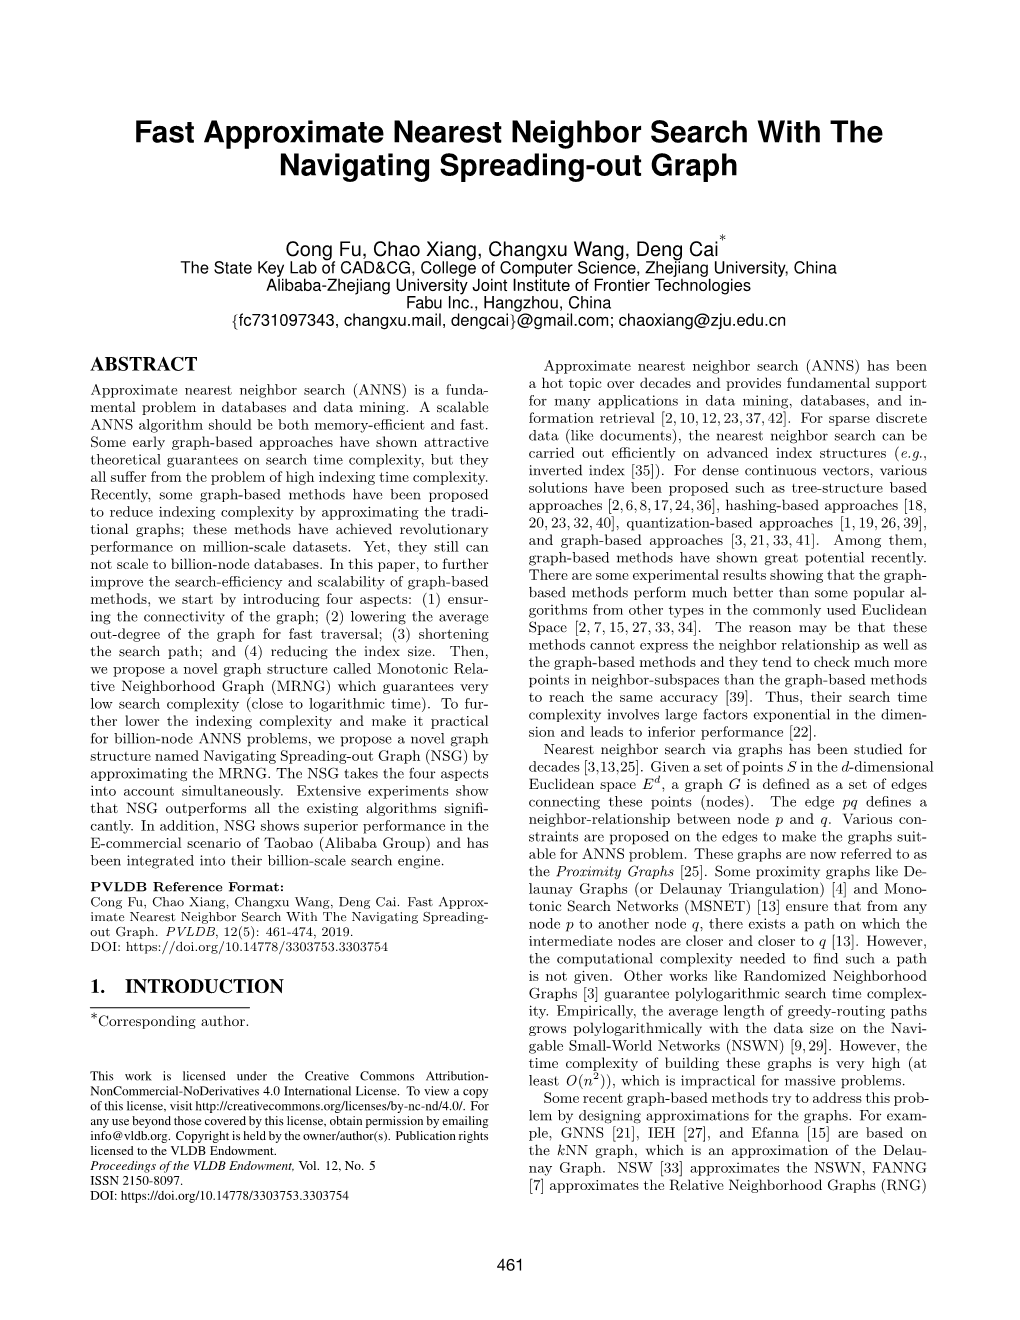 Fast Approximate Nearest Neighbor Search with the Navigating Spreading-Out Graph